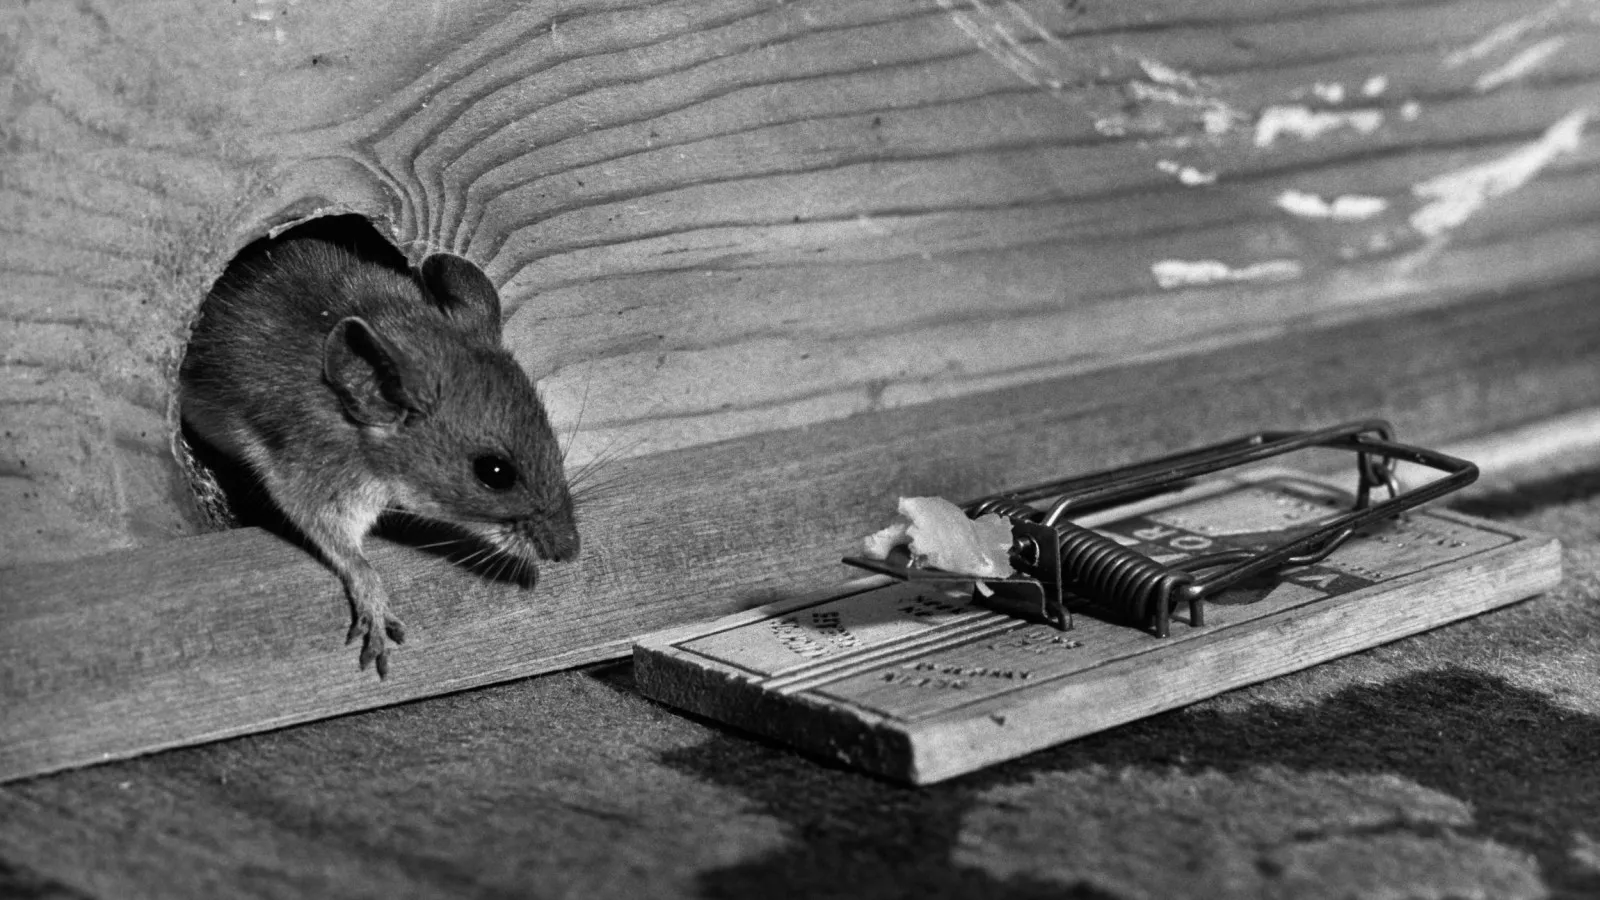 Mousetraps Not Working? Here's What to Do